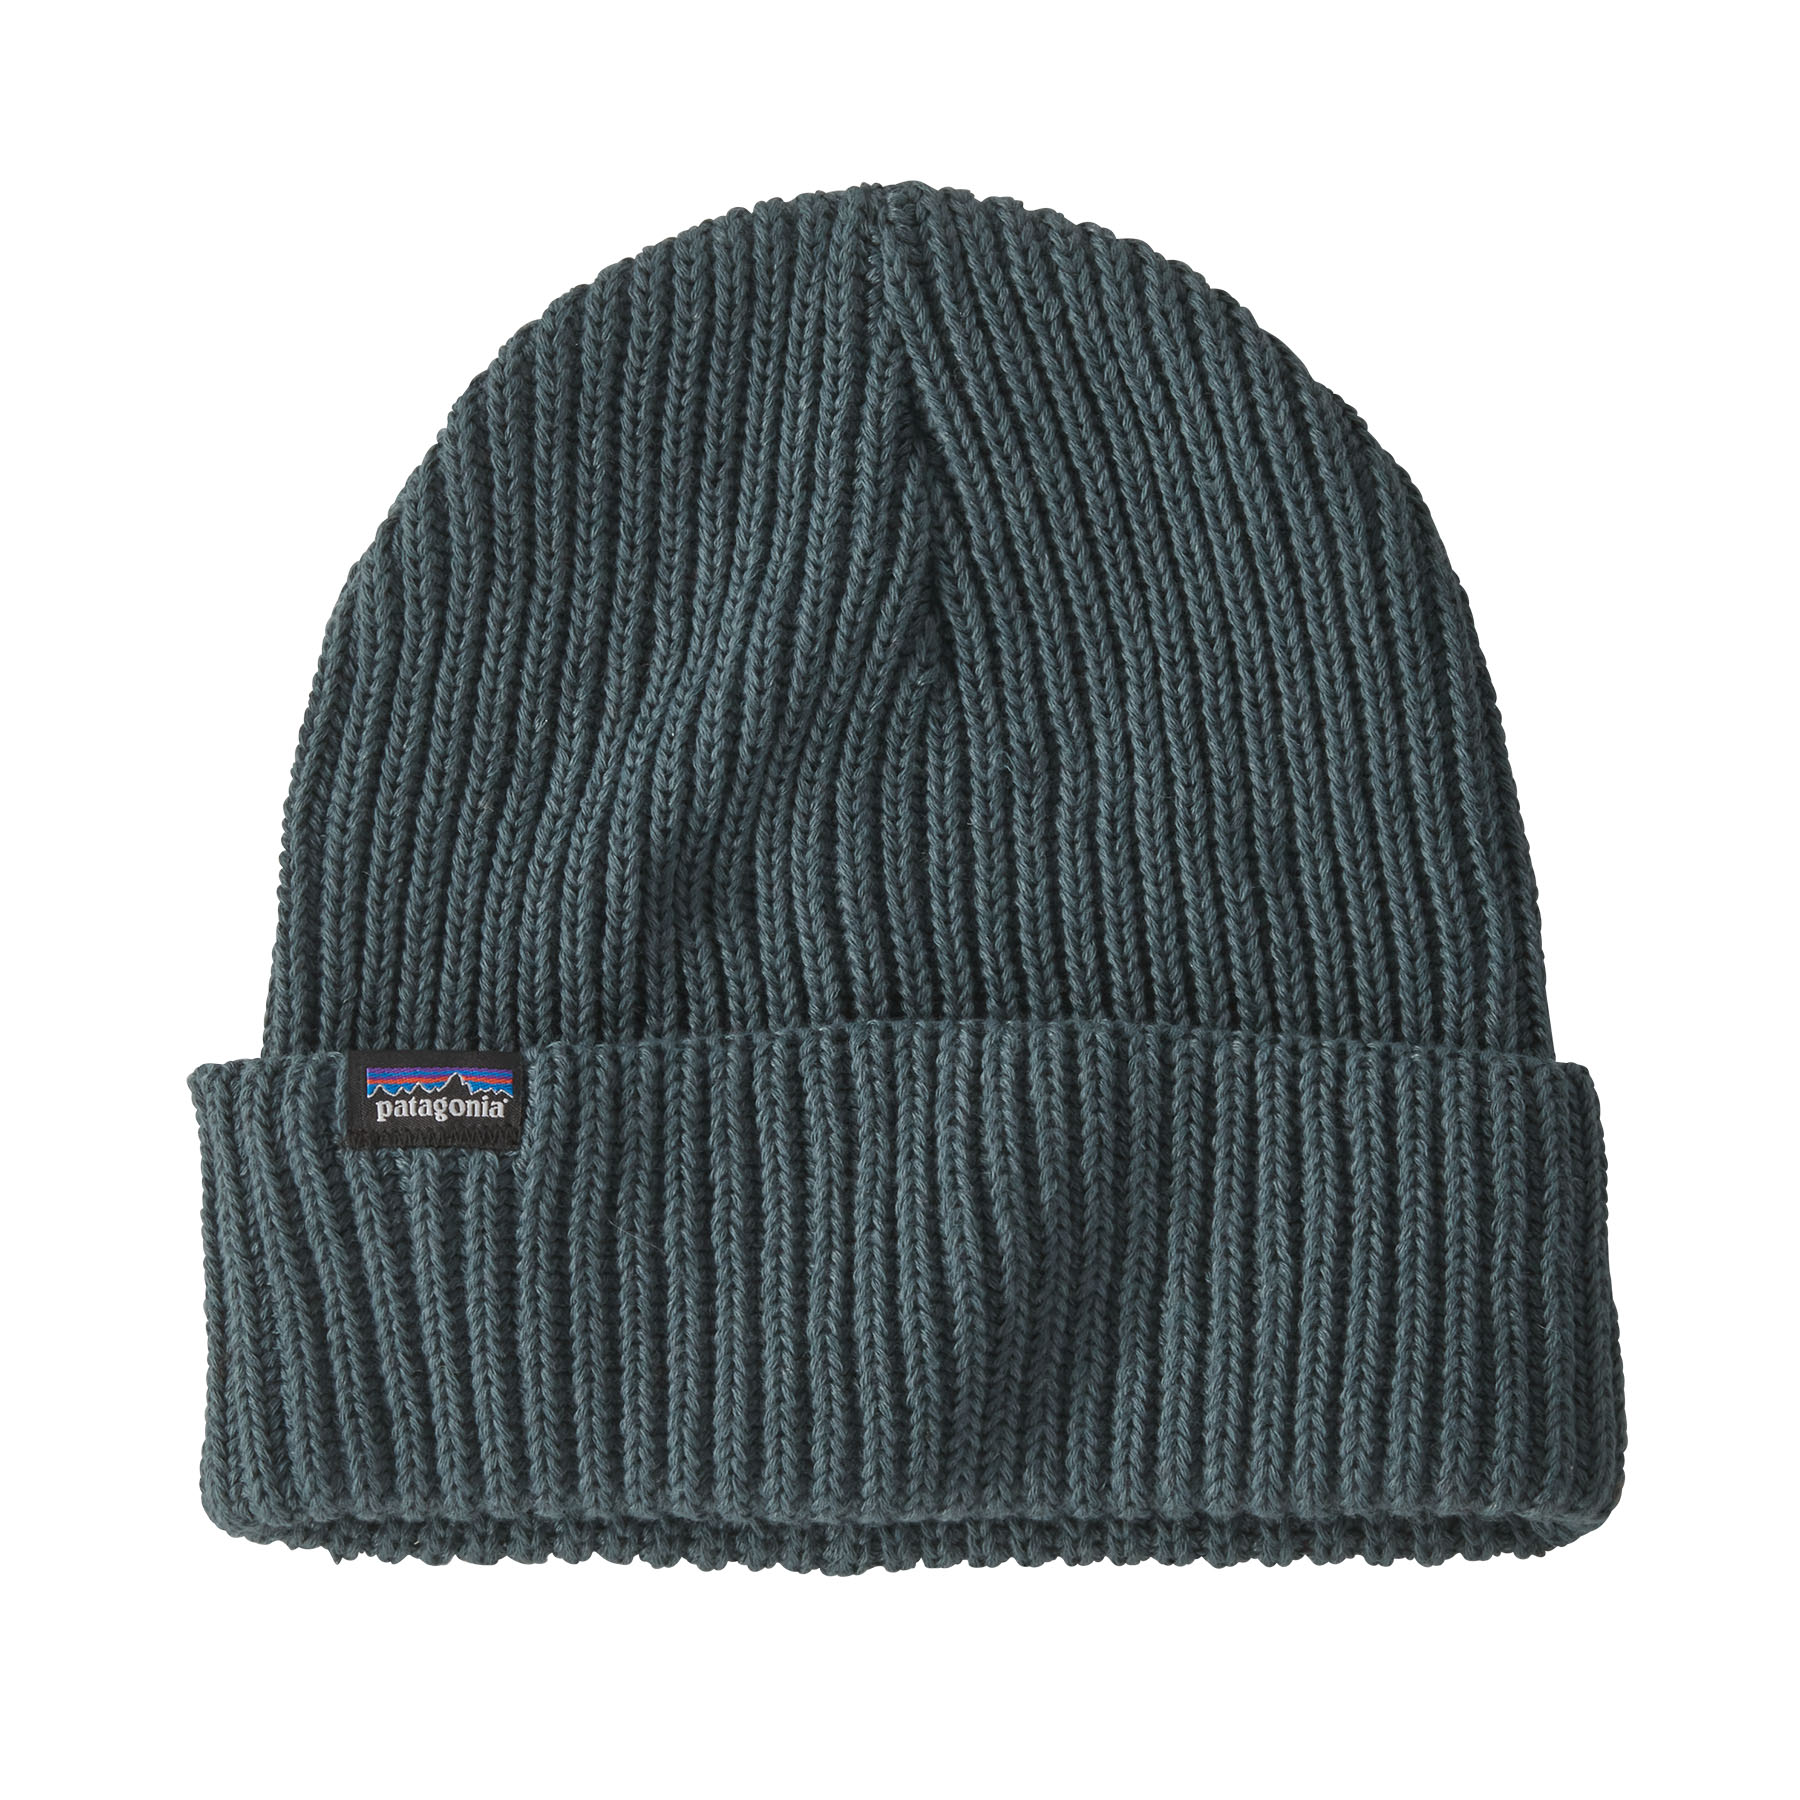 Fishermans Rolled Beanie (nouveau green)